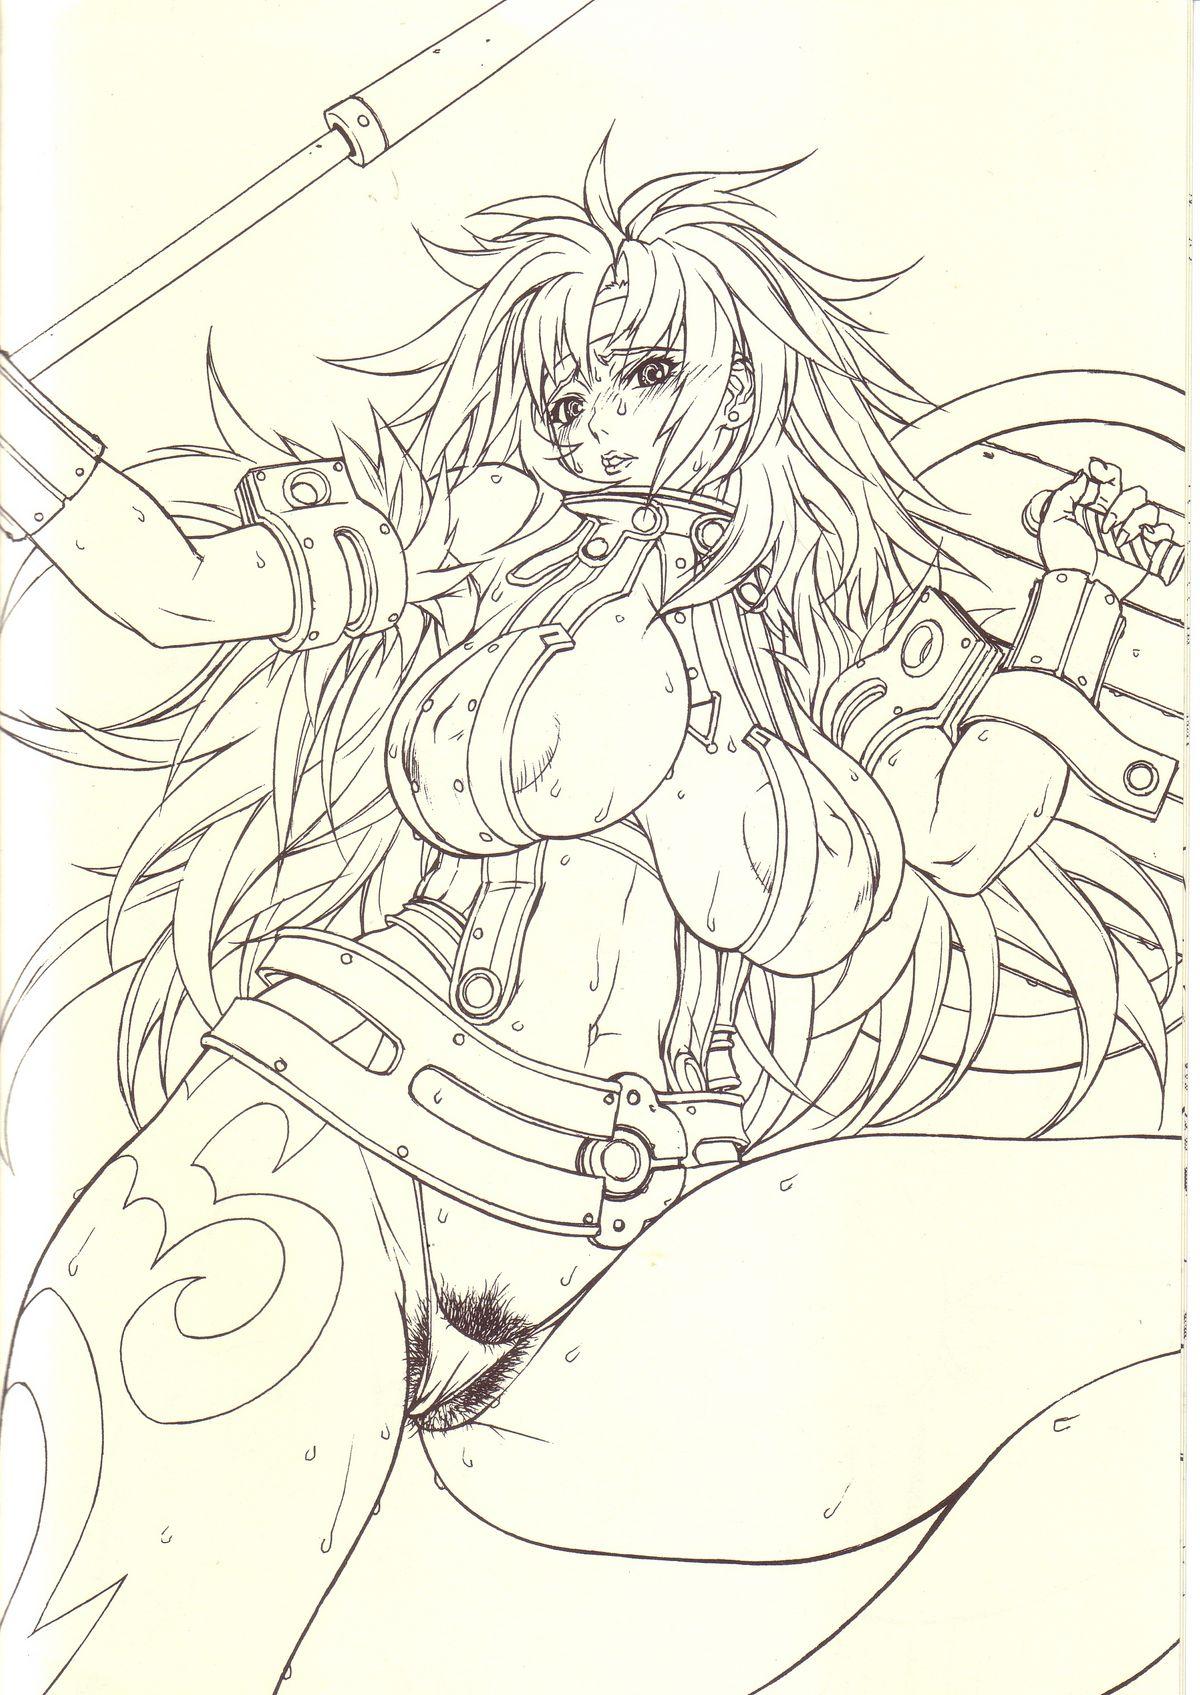 Adorable Chichishiki 5 - Queens blade 3way - Page 9